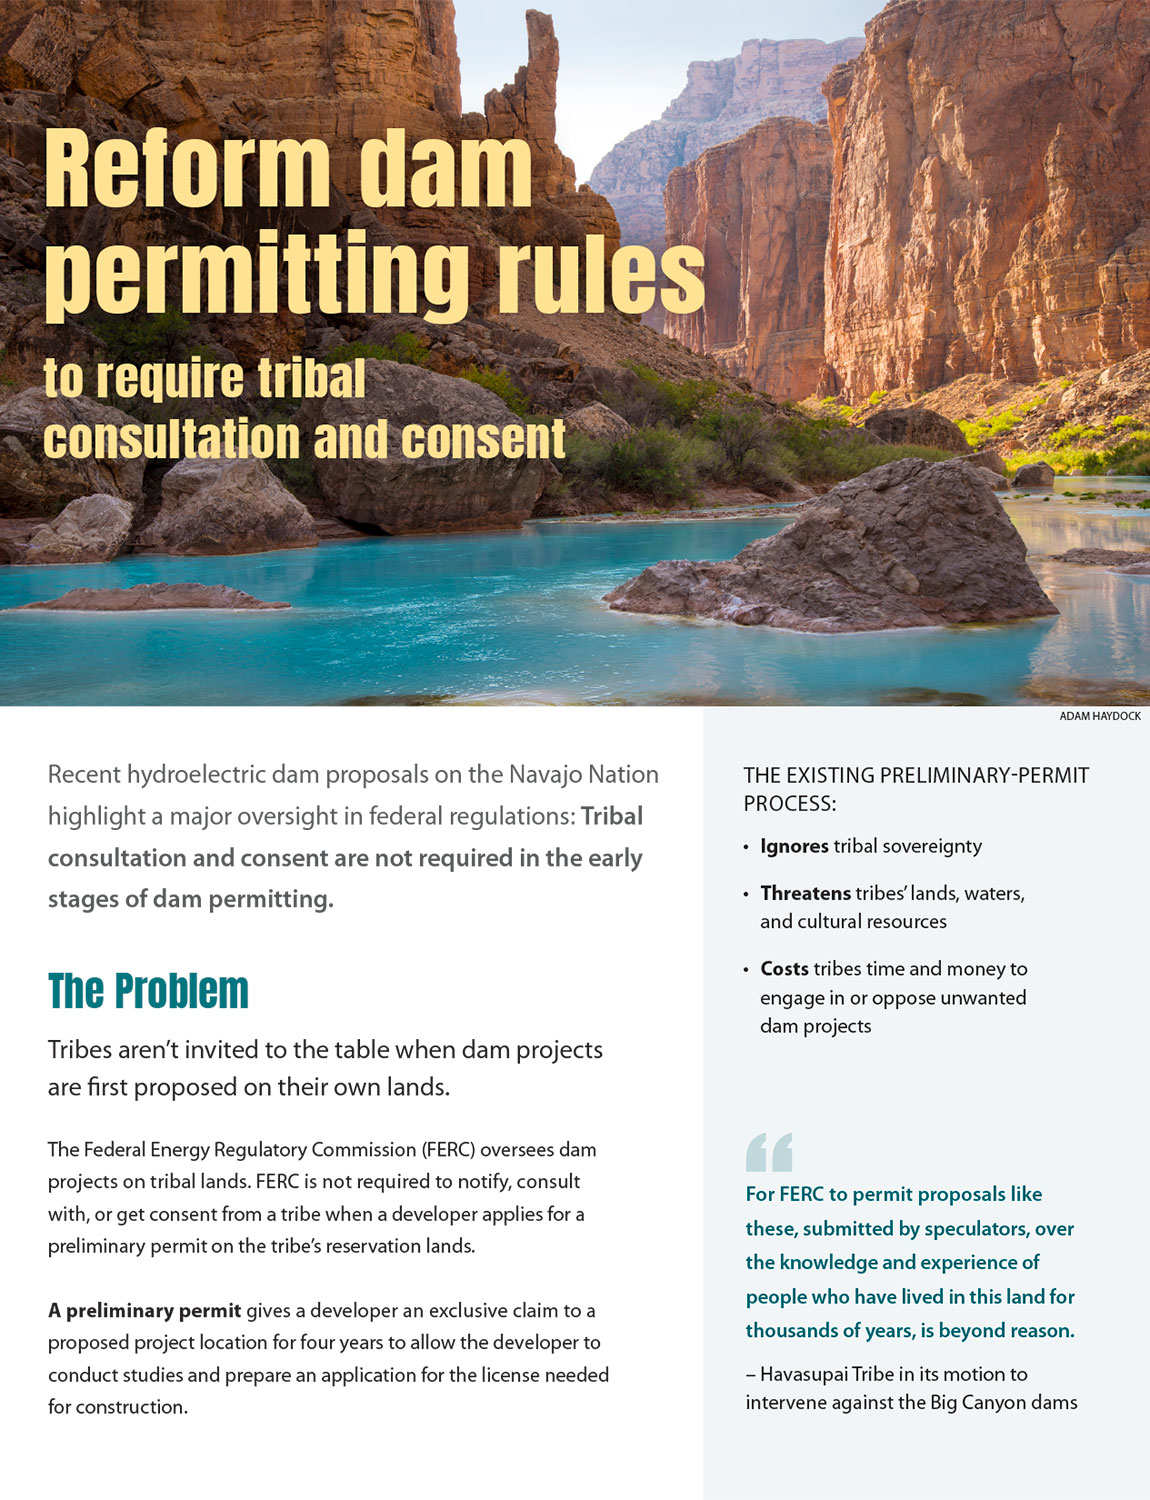 Learn about FERC and the dam permitting process